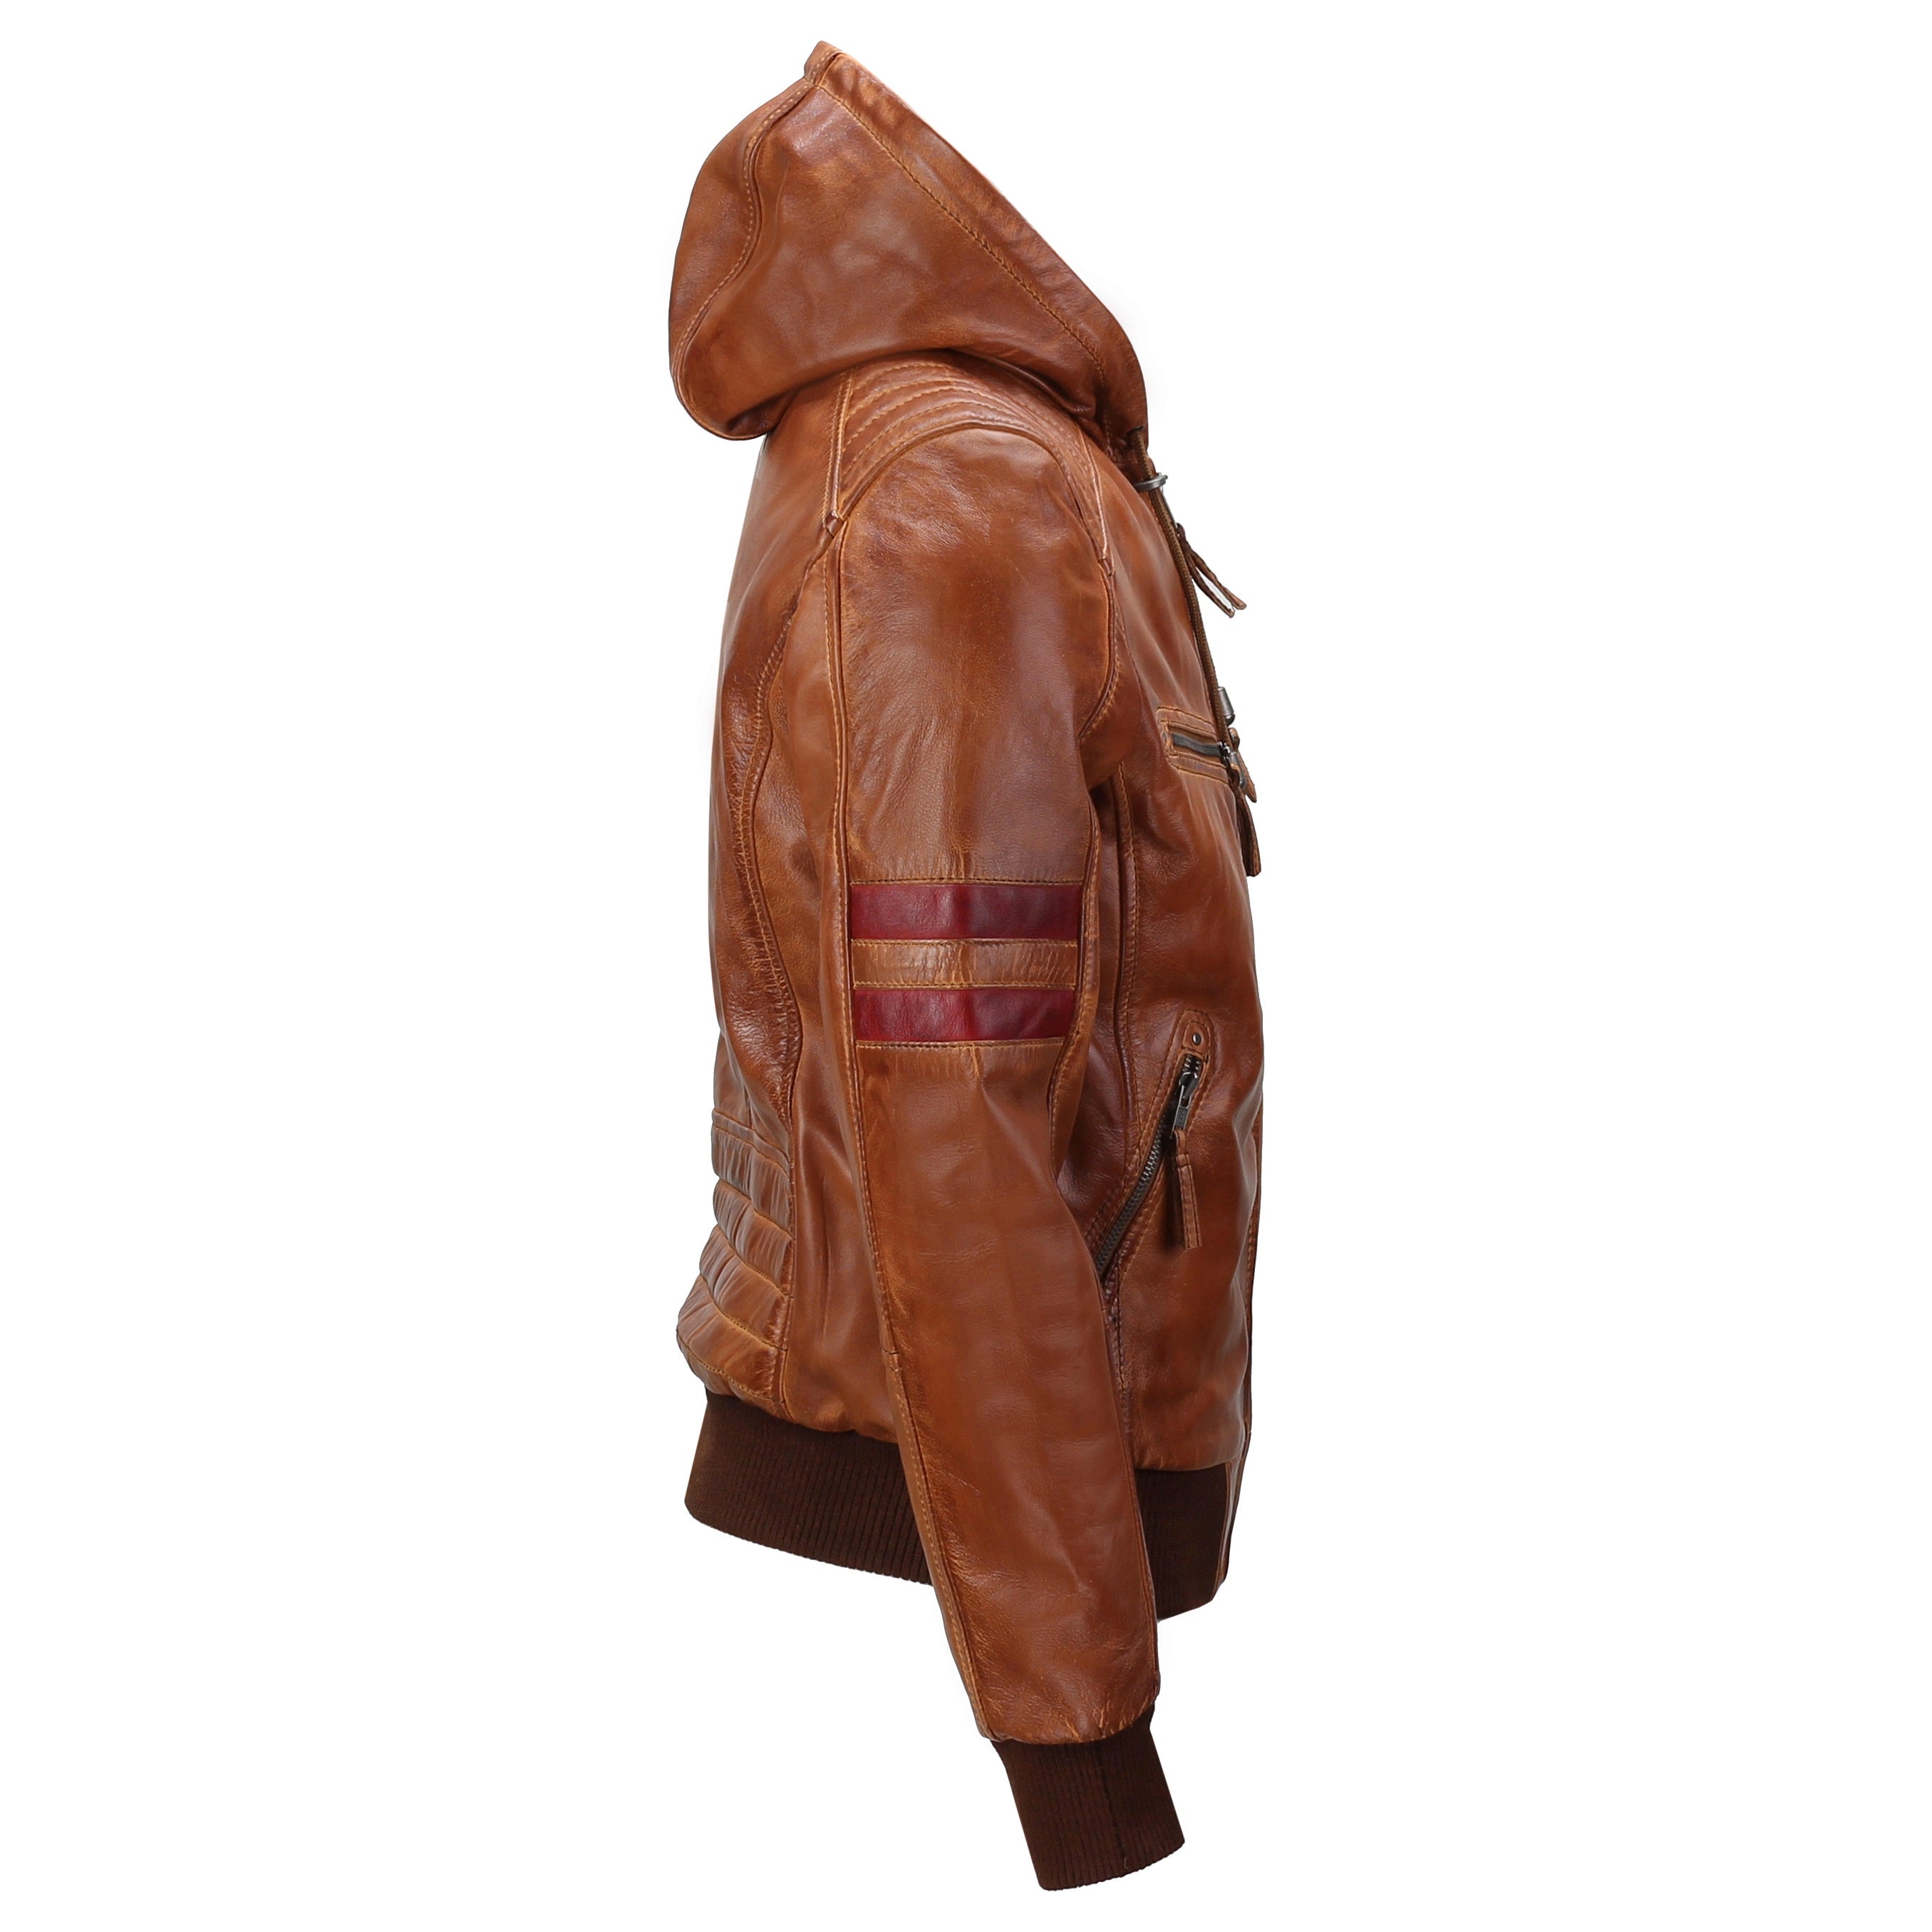 BOMBER BIKER SLIM FIT TIMBER LEATHER JACKET WITH HOOD